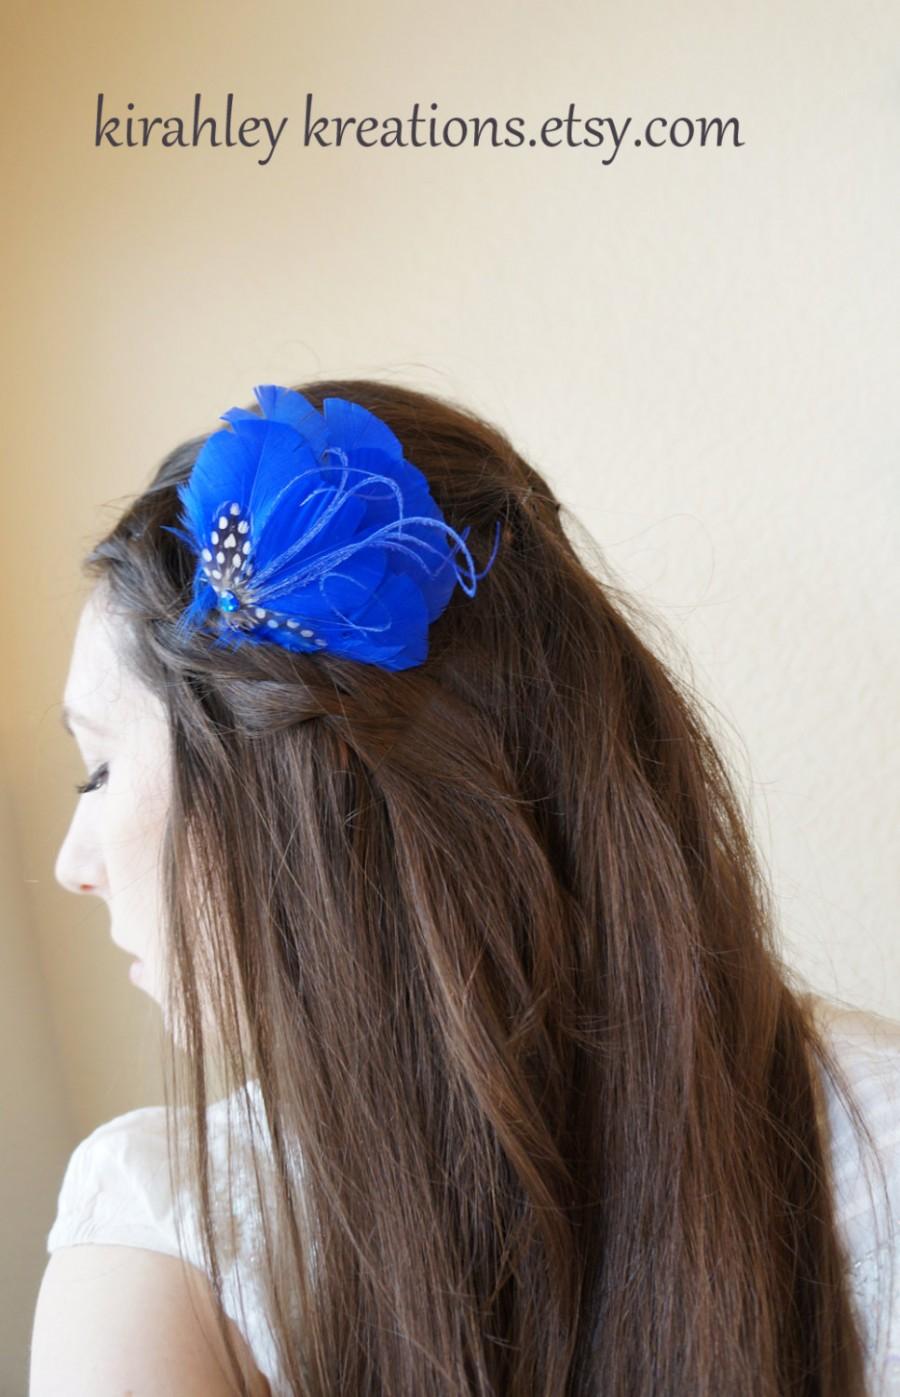 Свадьба - Royal Cobalt Something BLUE BETTY Feather Fascinator Hairpiece Hair Clip Spotted Guinea Peacock Herl Jewel Bride Bridal Bridesmaid Prom